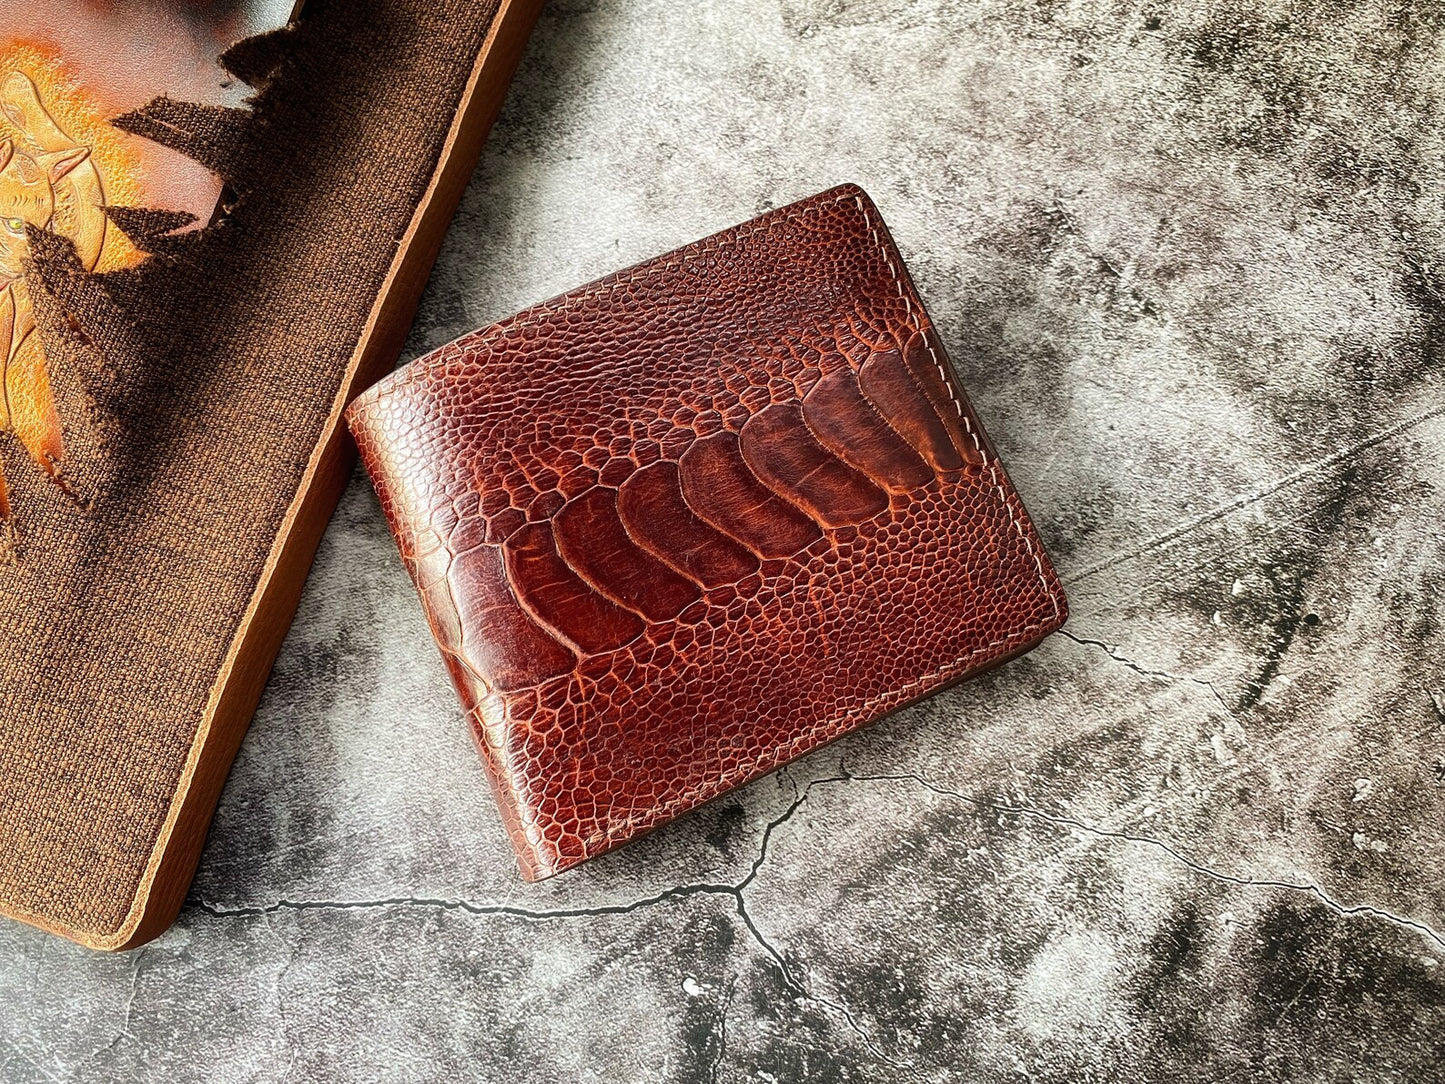 Custom Brown Ostrich Leg Wallet with Coin Pocket